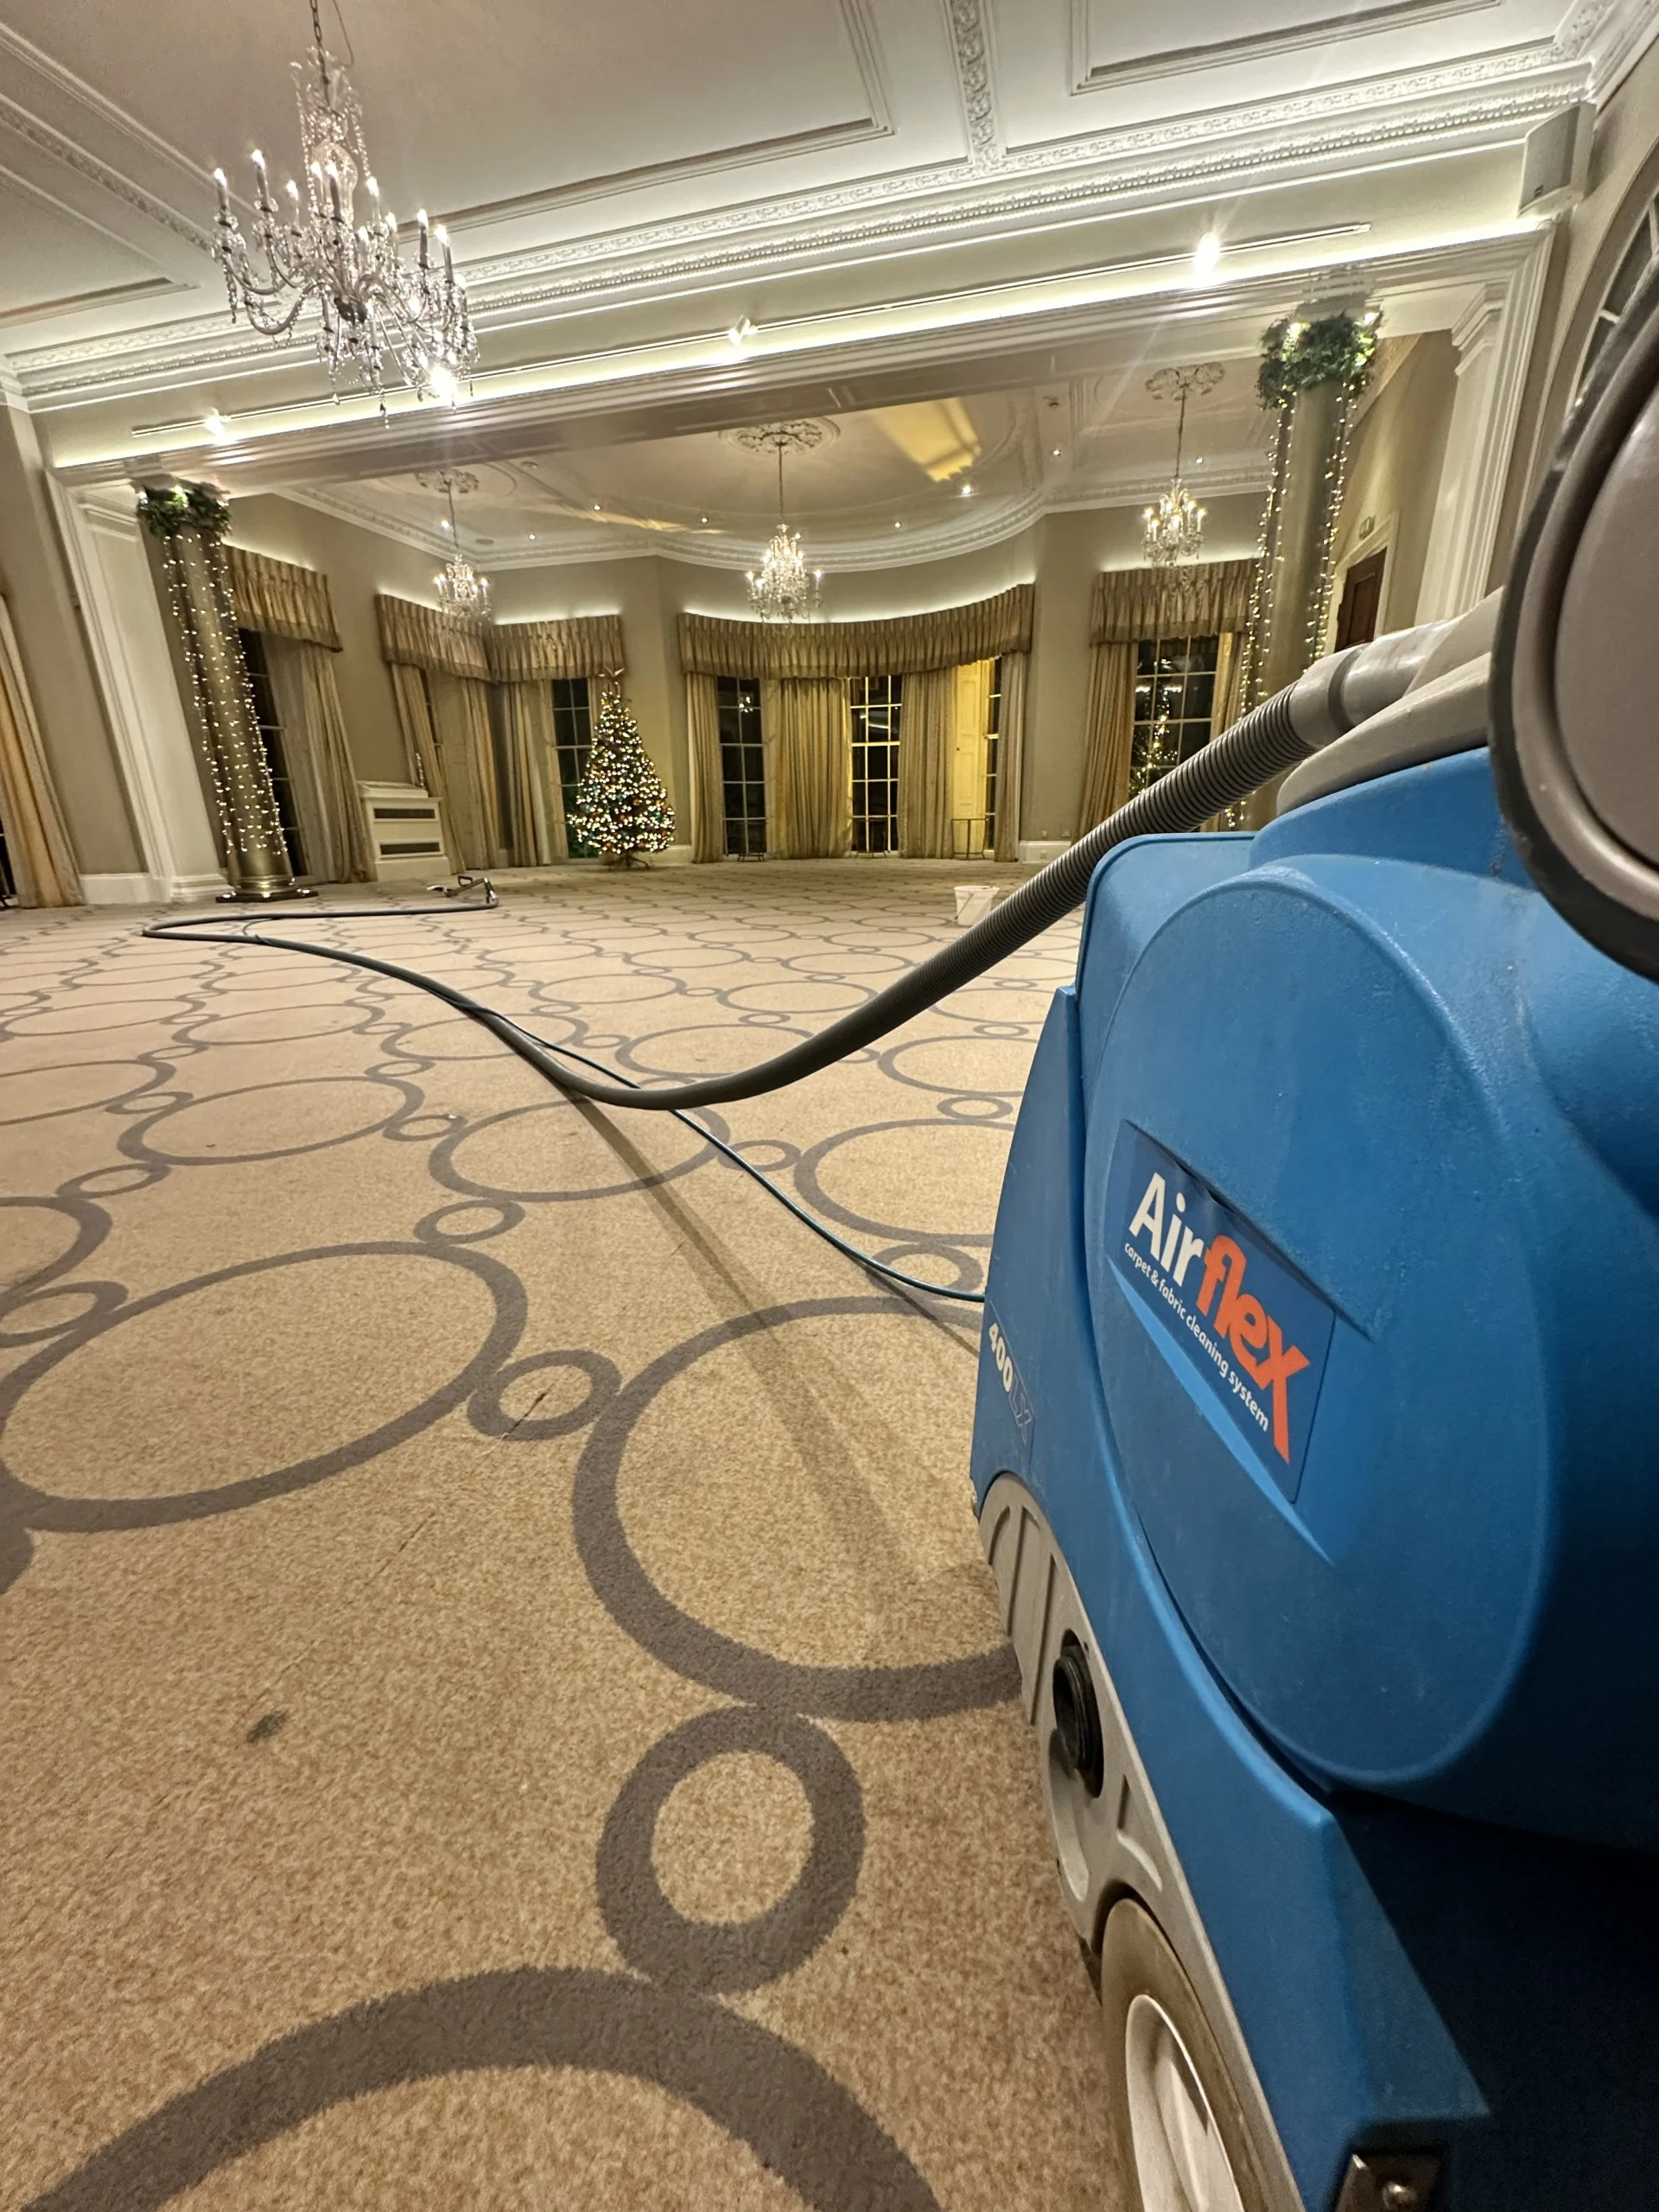 Carpet cleaning in harrogate for The Rudding Park Hotel and Spa